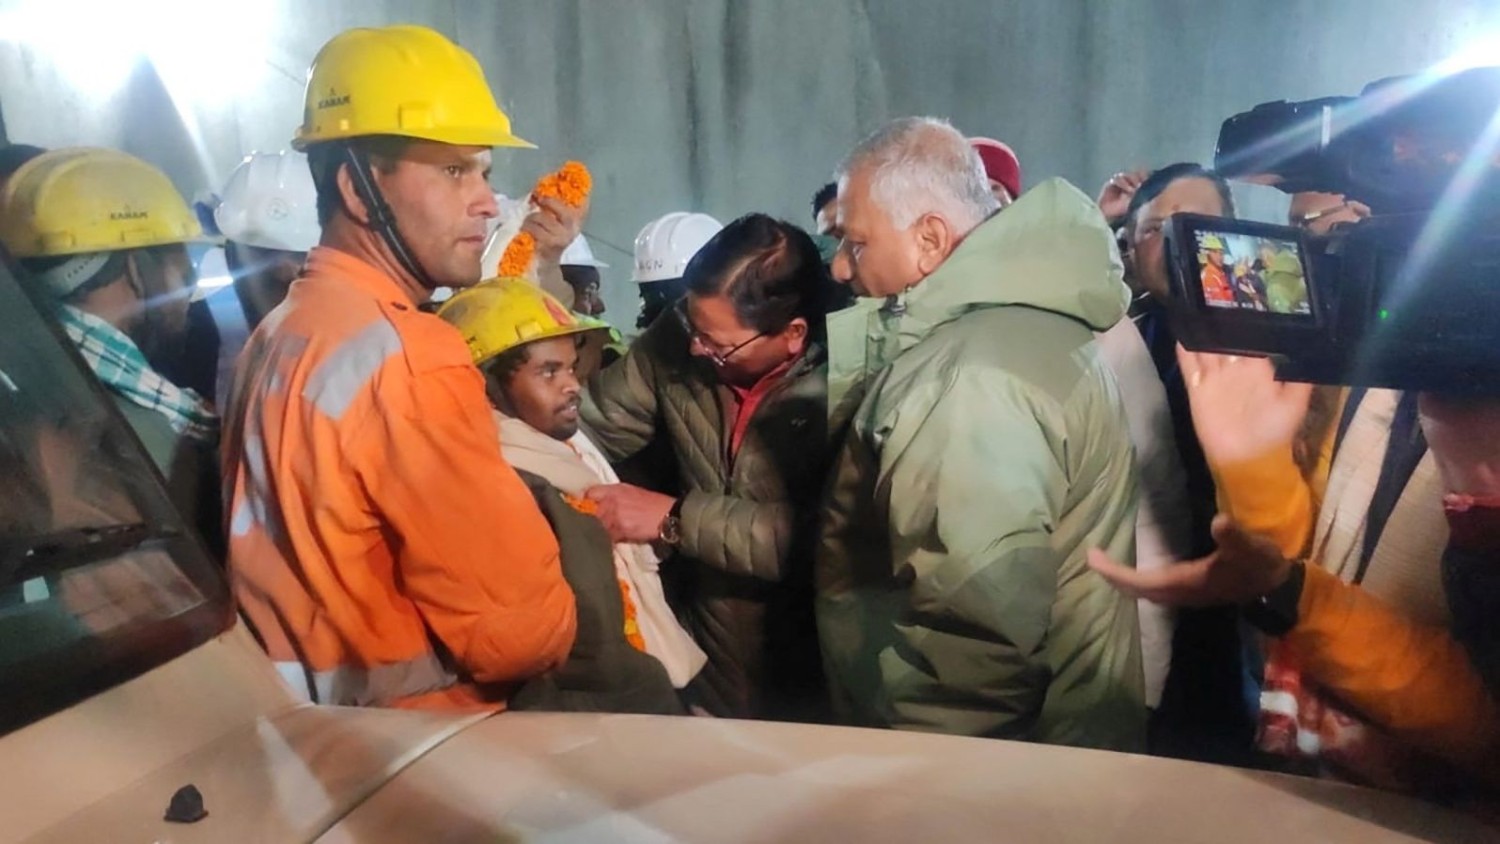 In pictures: Indian workers trapped in collapsed tunnel rescued after 17 days